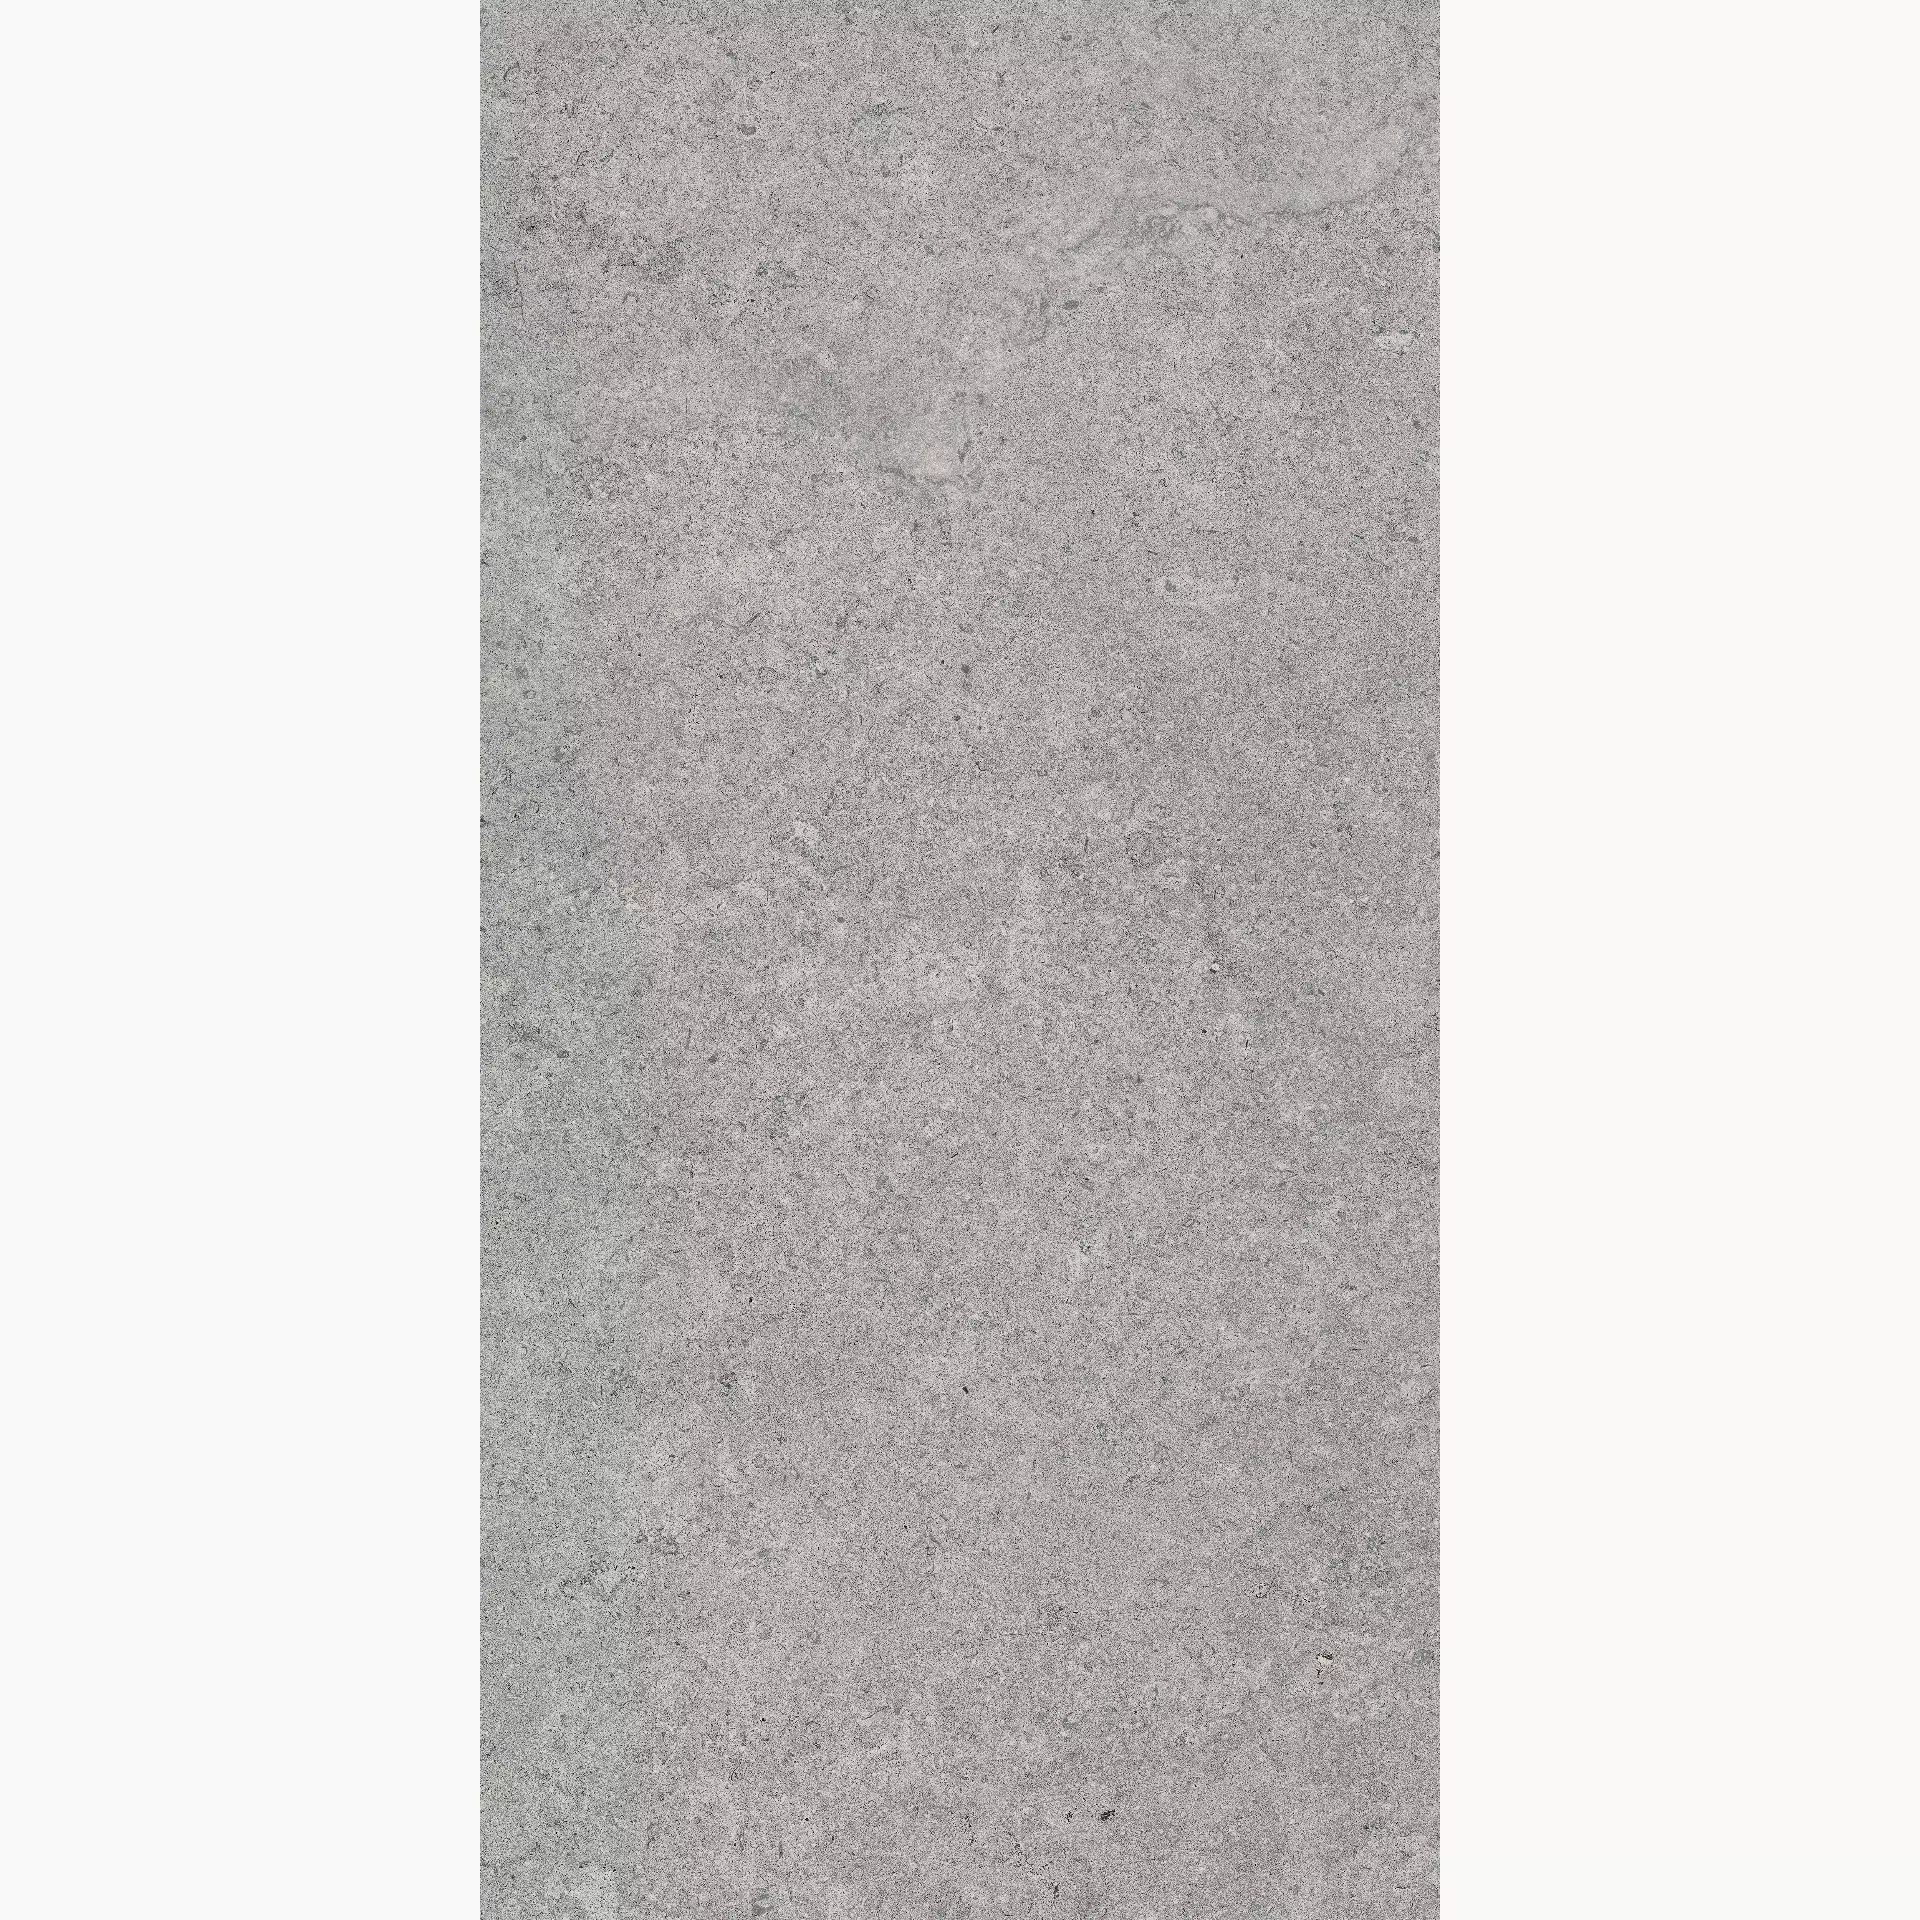 Cottodeste Pura Grey Hammered Protect EGXPR50 60x120cm rectified 20mm